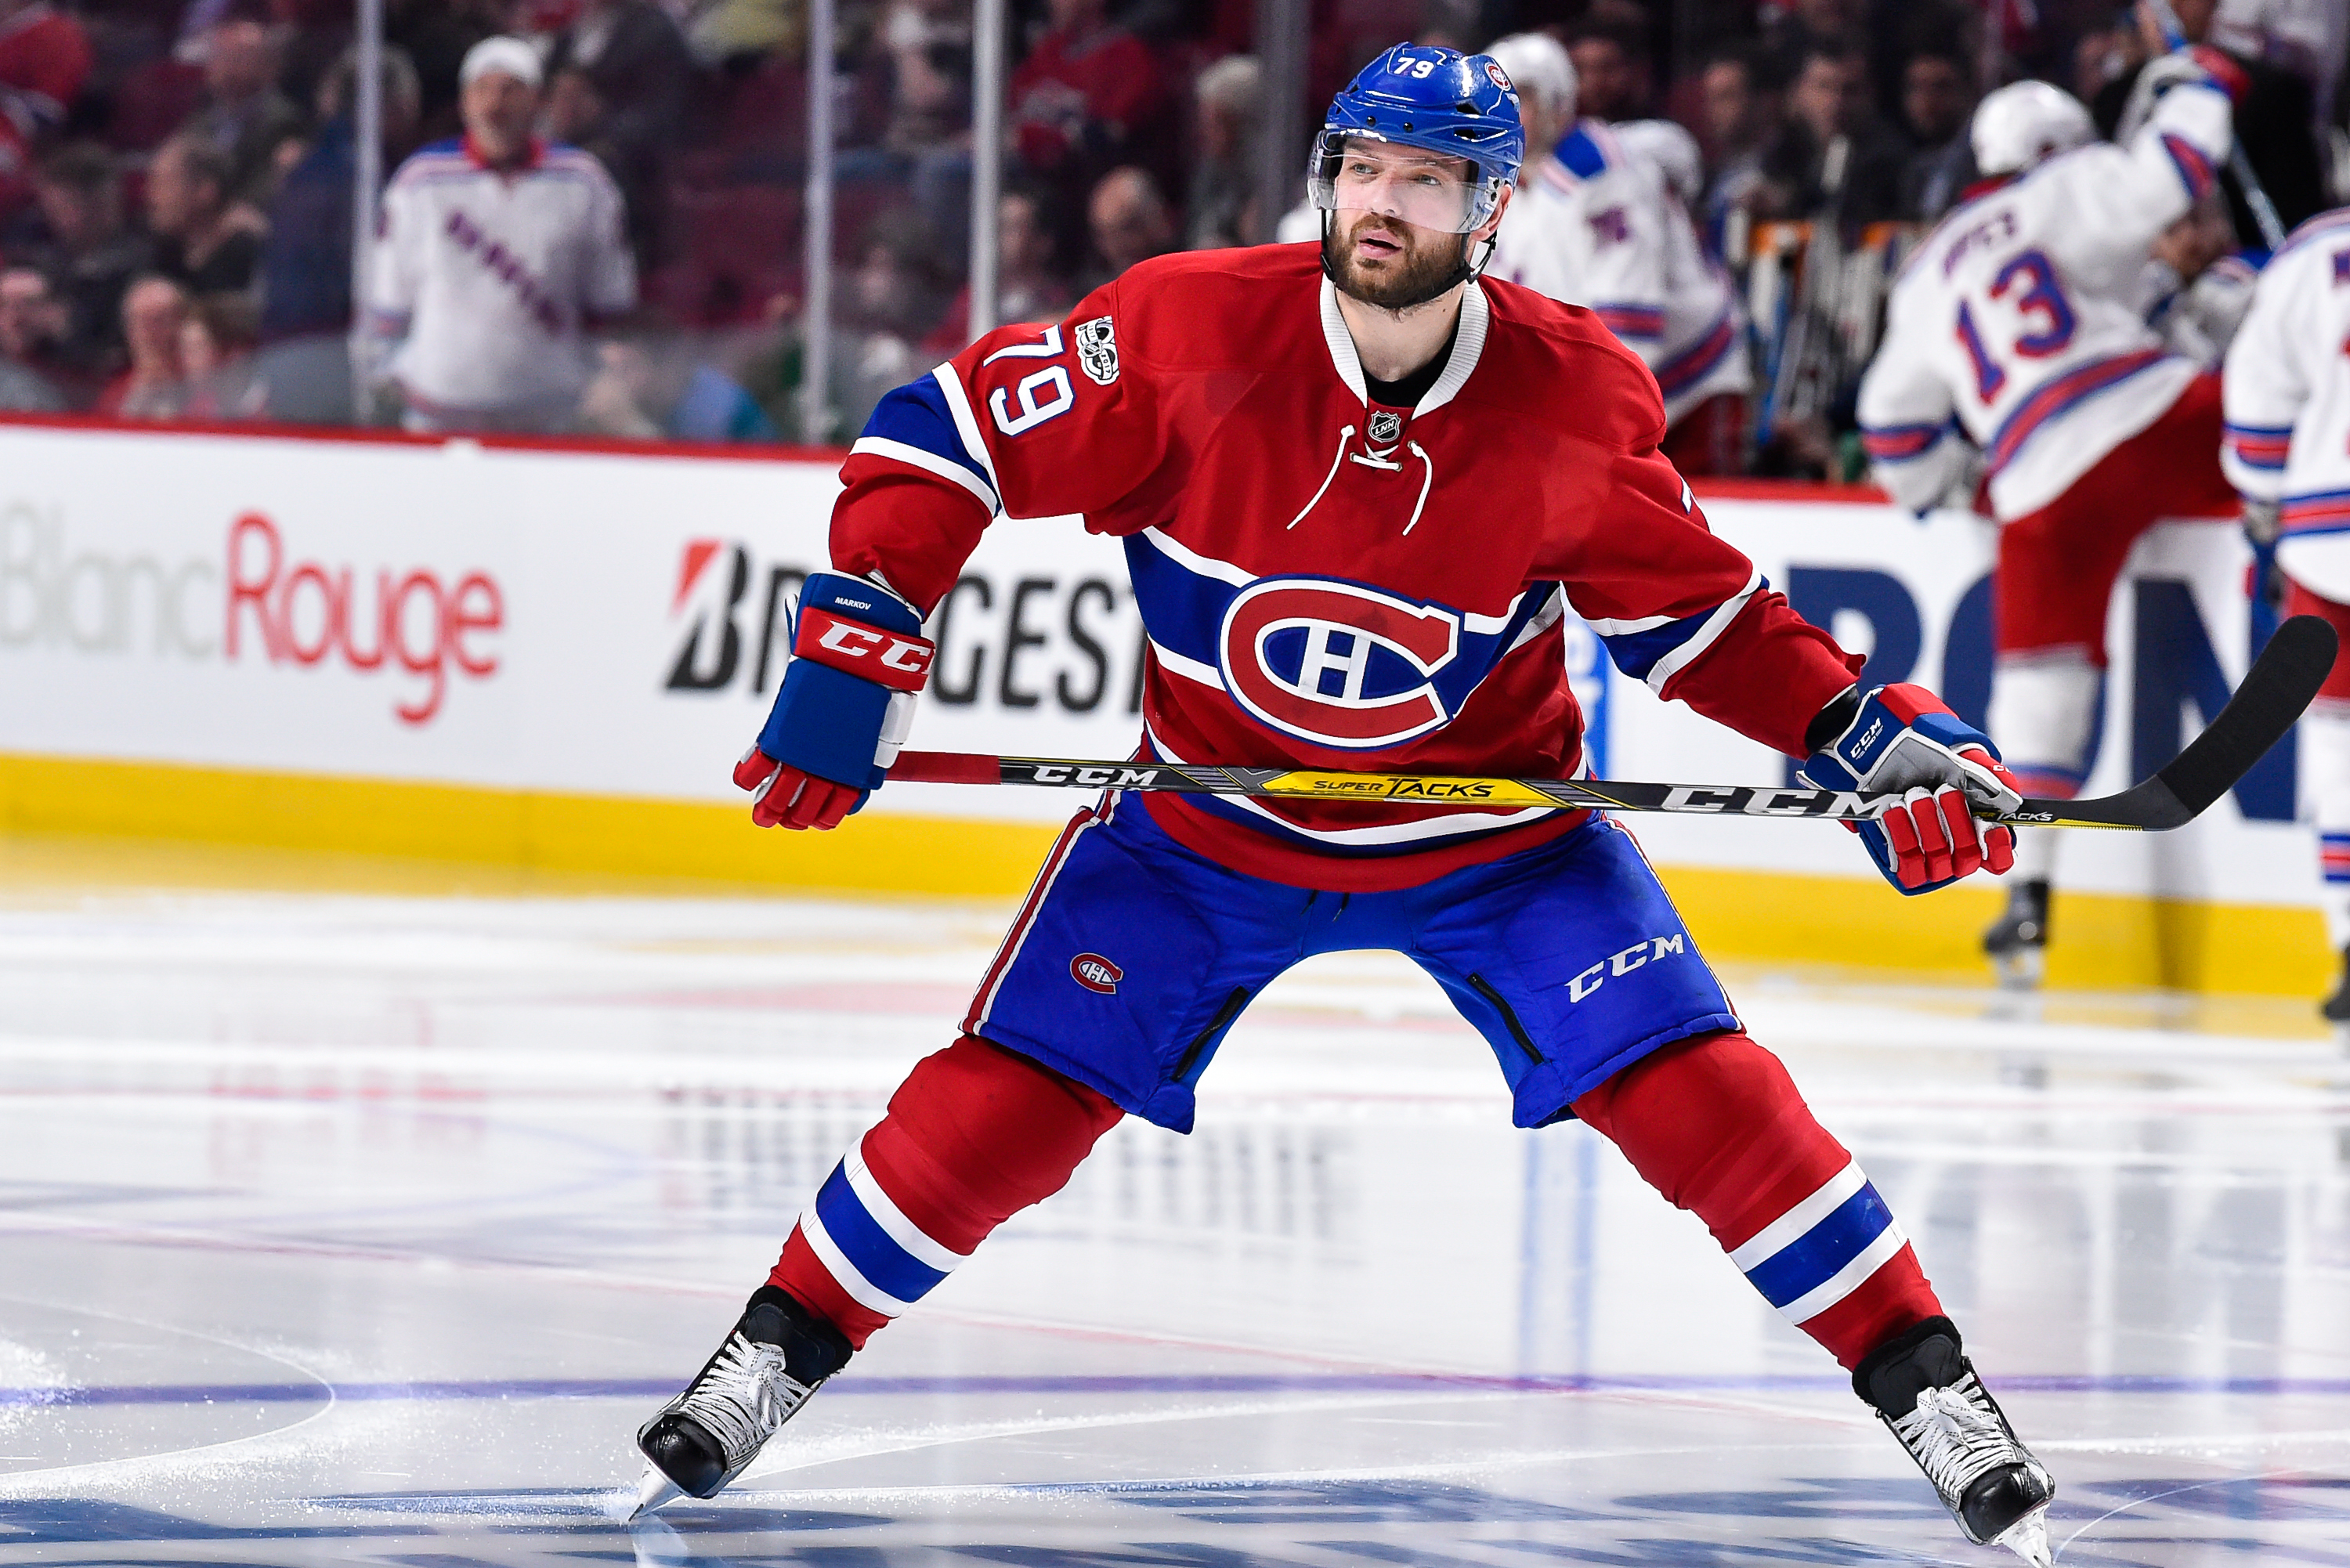 Andrei Markov leads Canadiens past Panthers